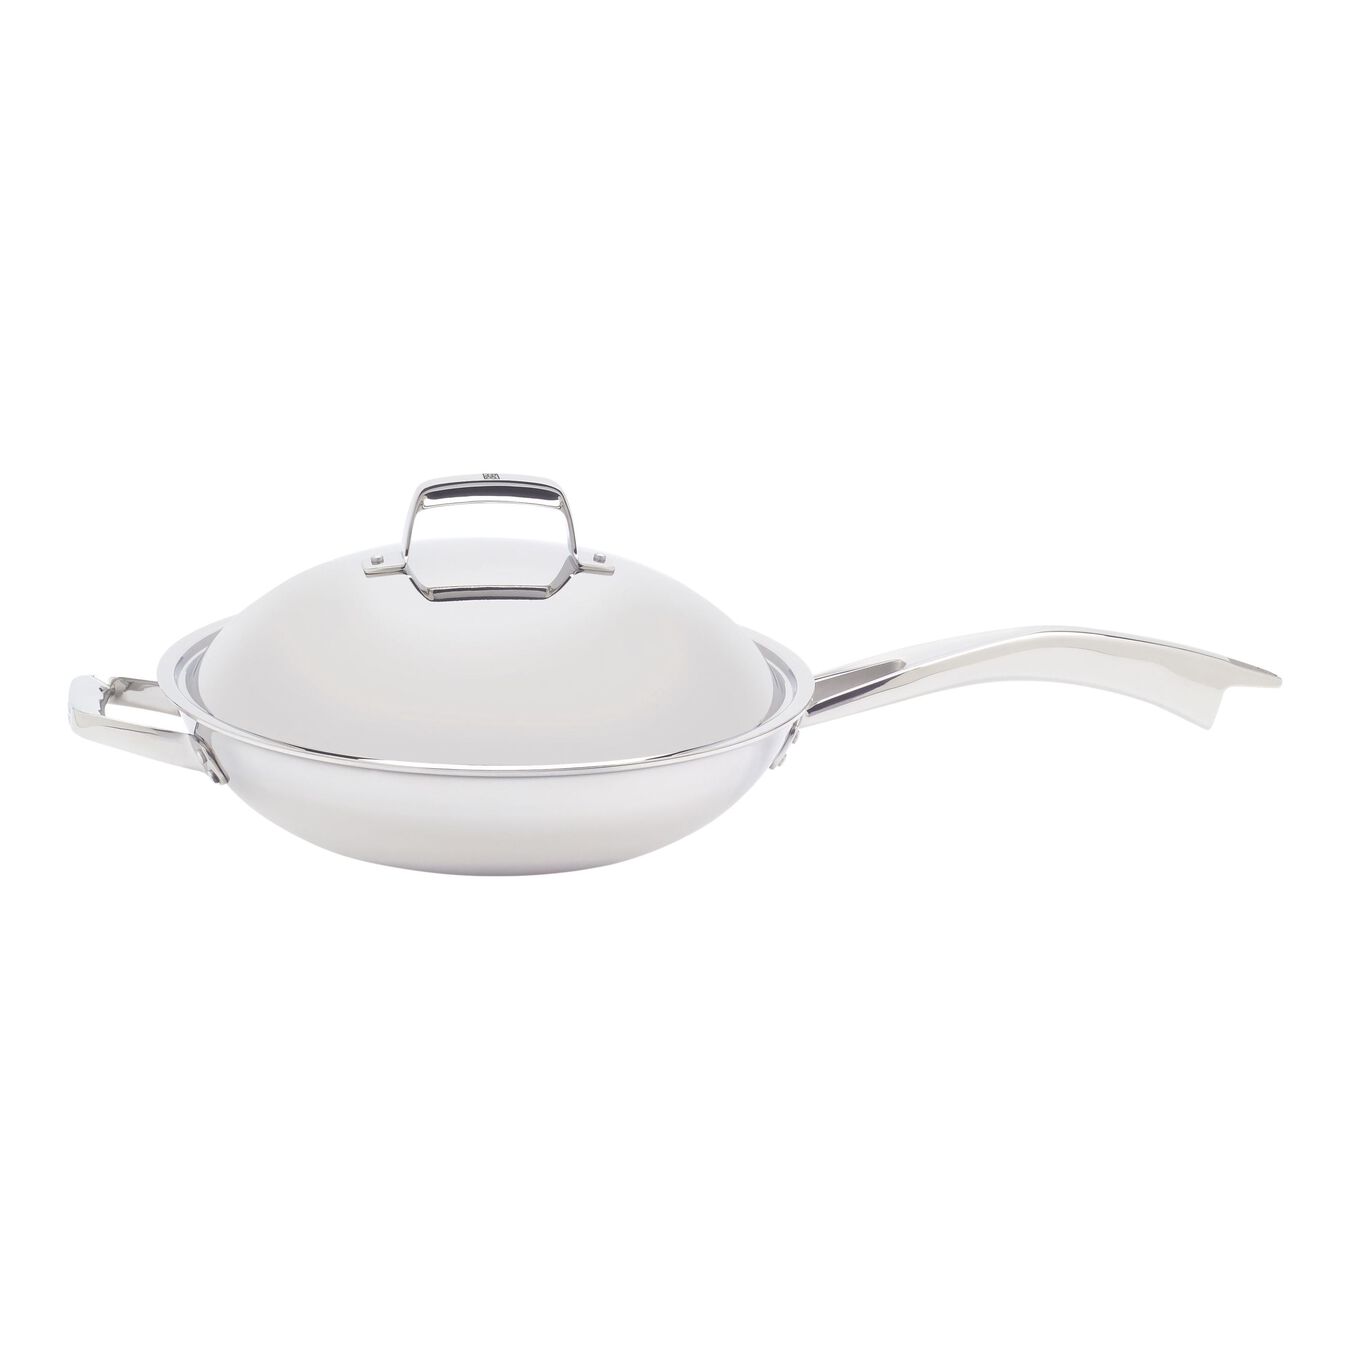 32 cm / 12.5 inch 18/10 Stainless Steel Wok with lid,,large 1